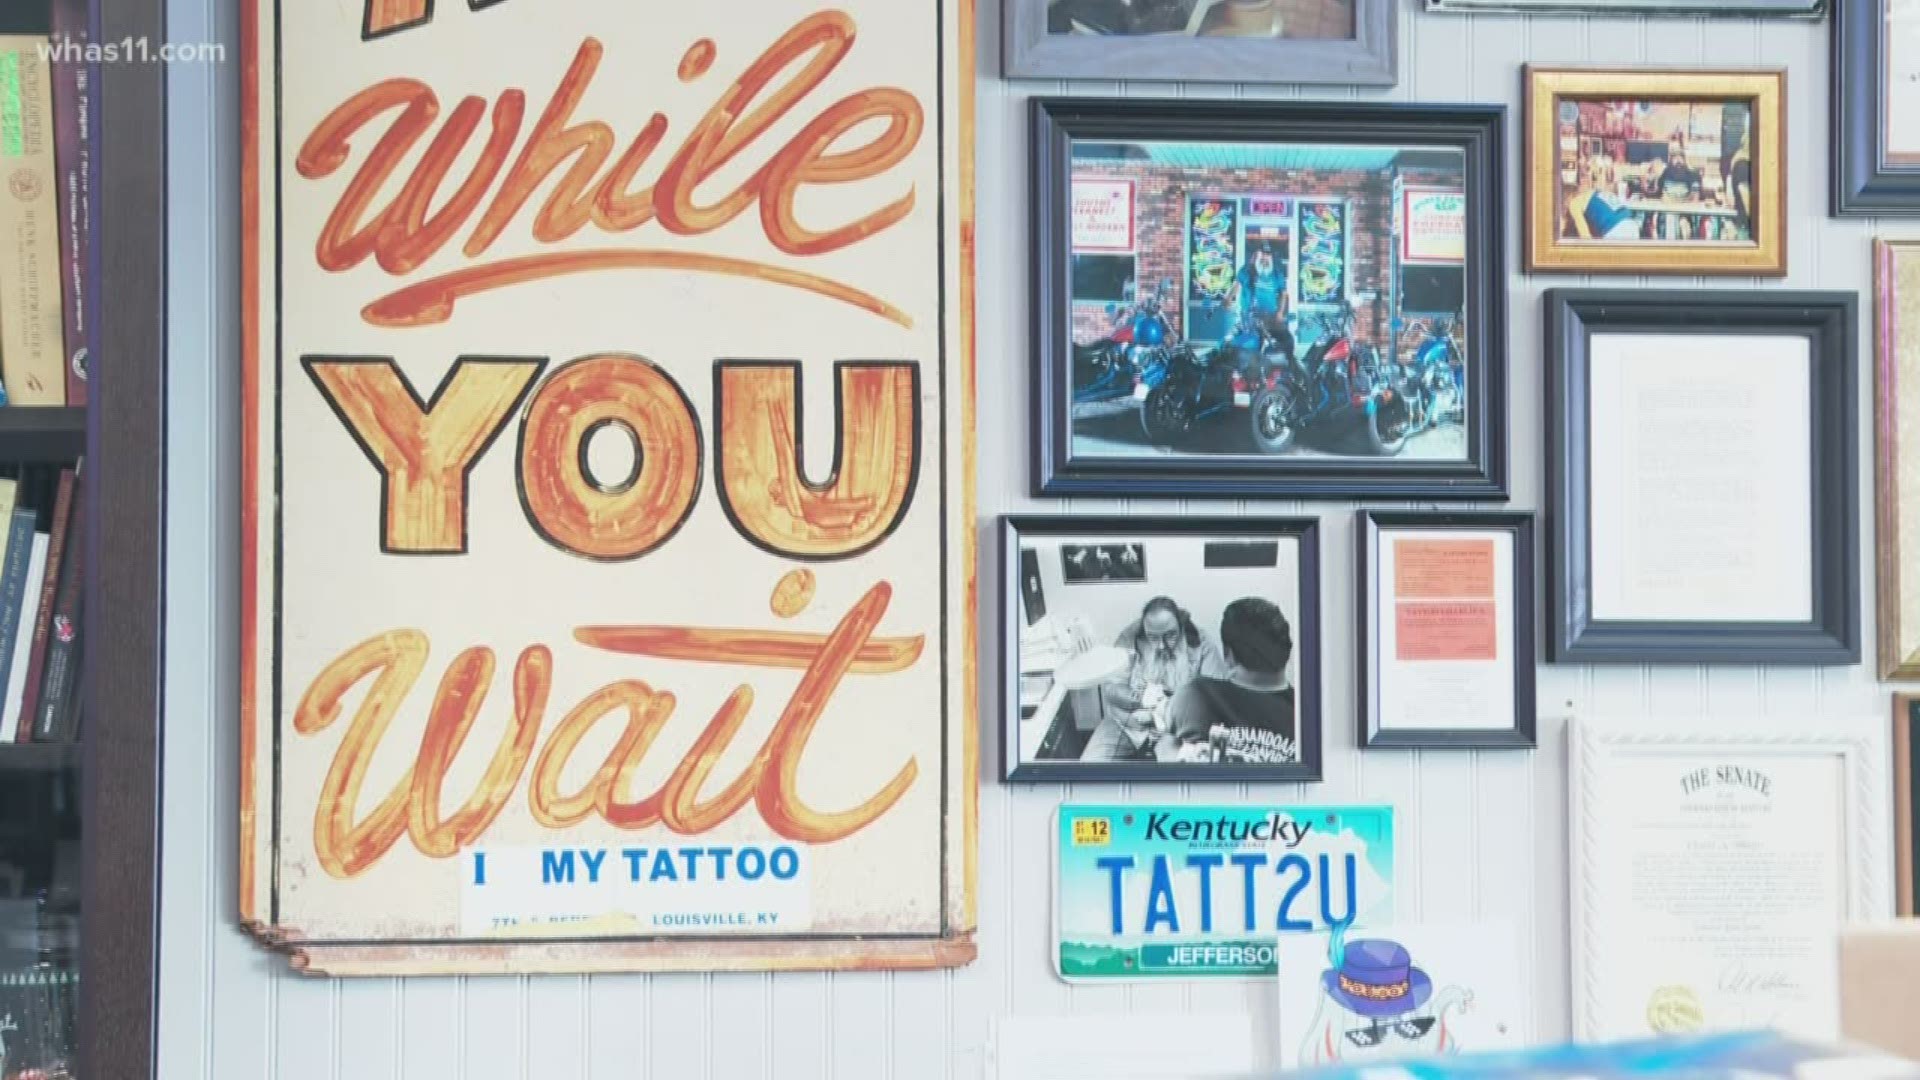 The slogan of Tattoo Charlie's, 'While you Wait,' has a new meaning amidst coronavirus concerns in the Commonwealth.